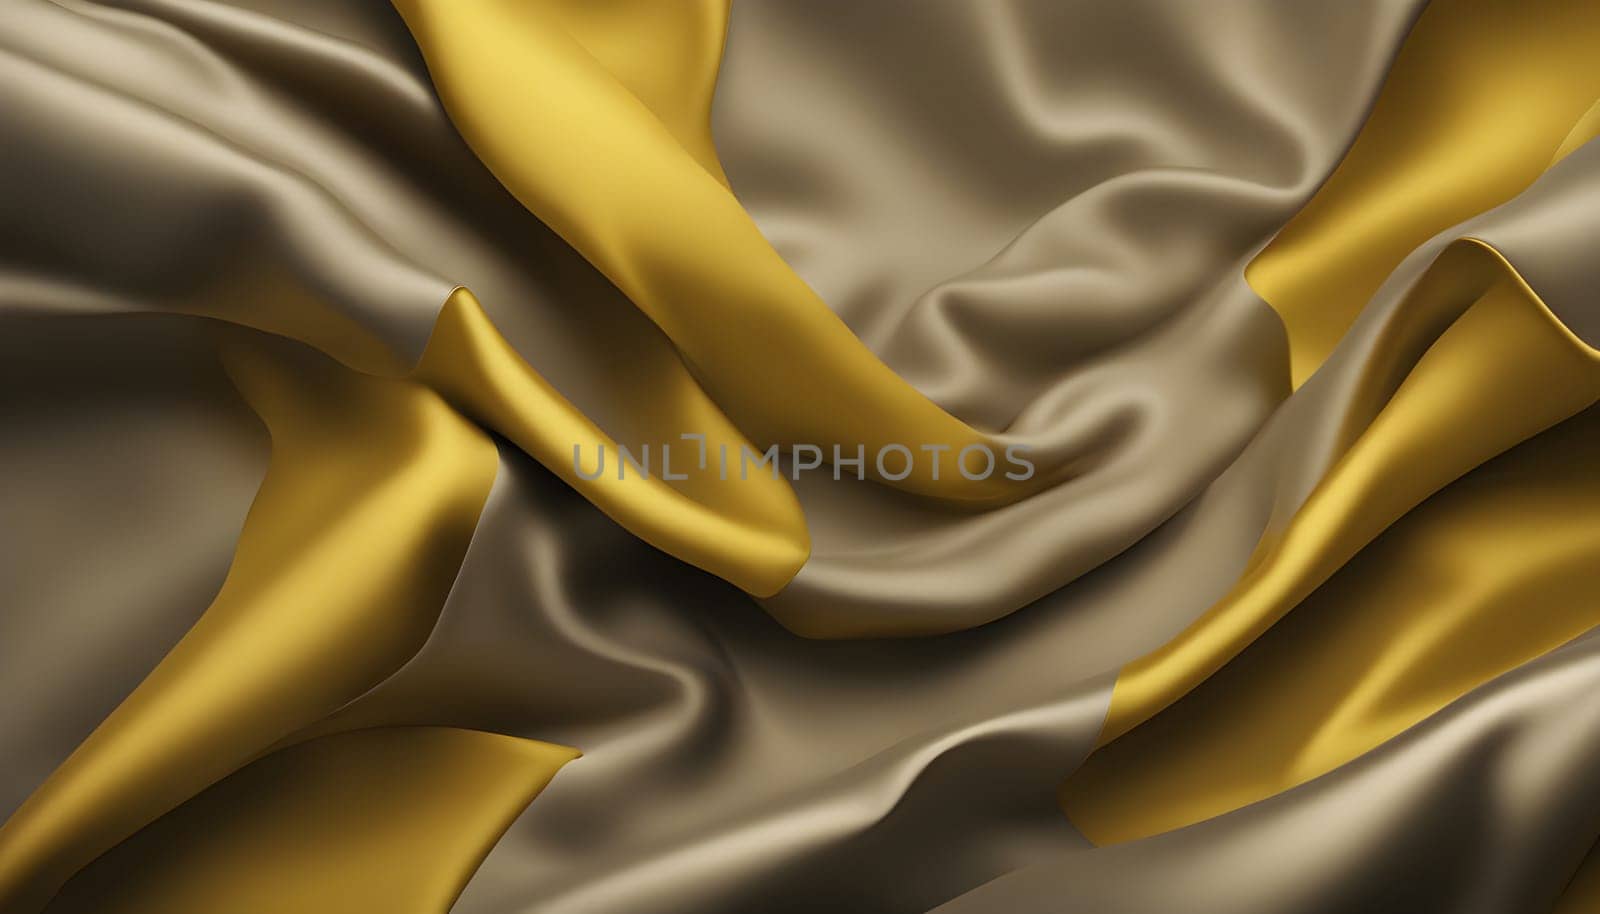 Technology background realistic color background folds of fabric or overlay for product or in shades of metallic dark yellow color by rostik924